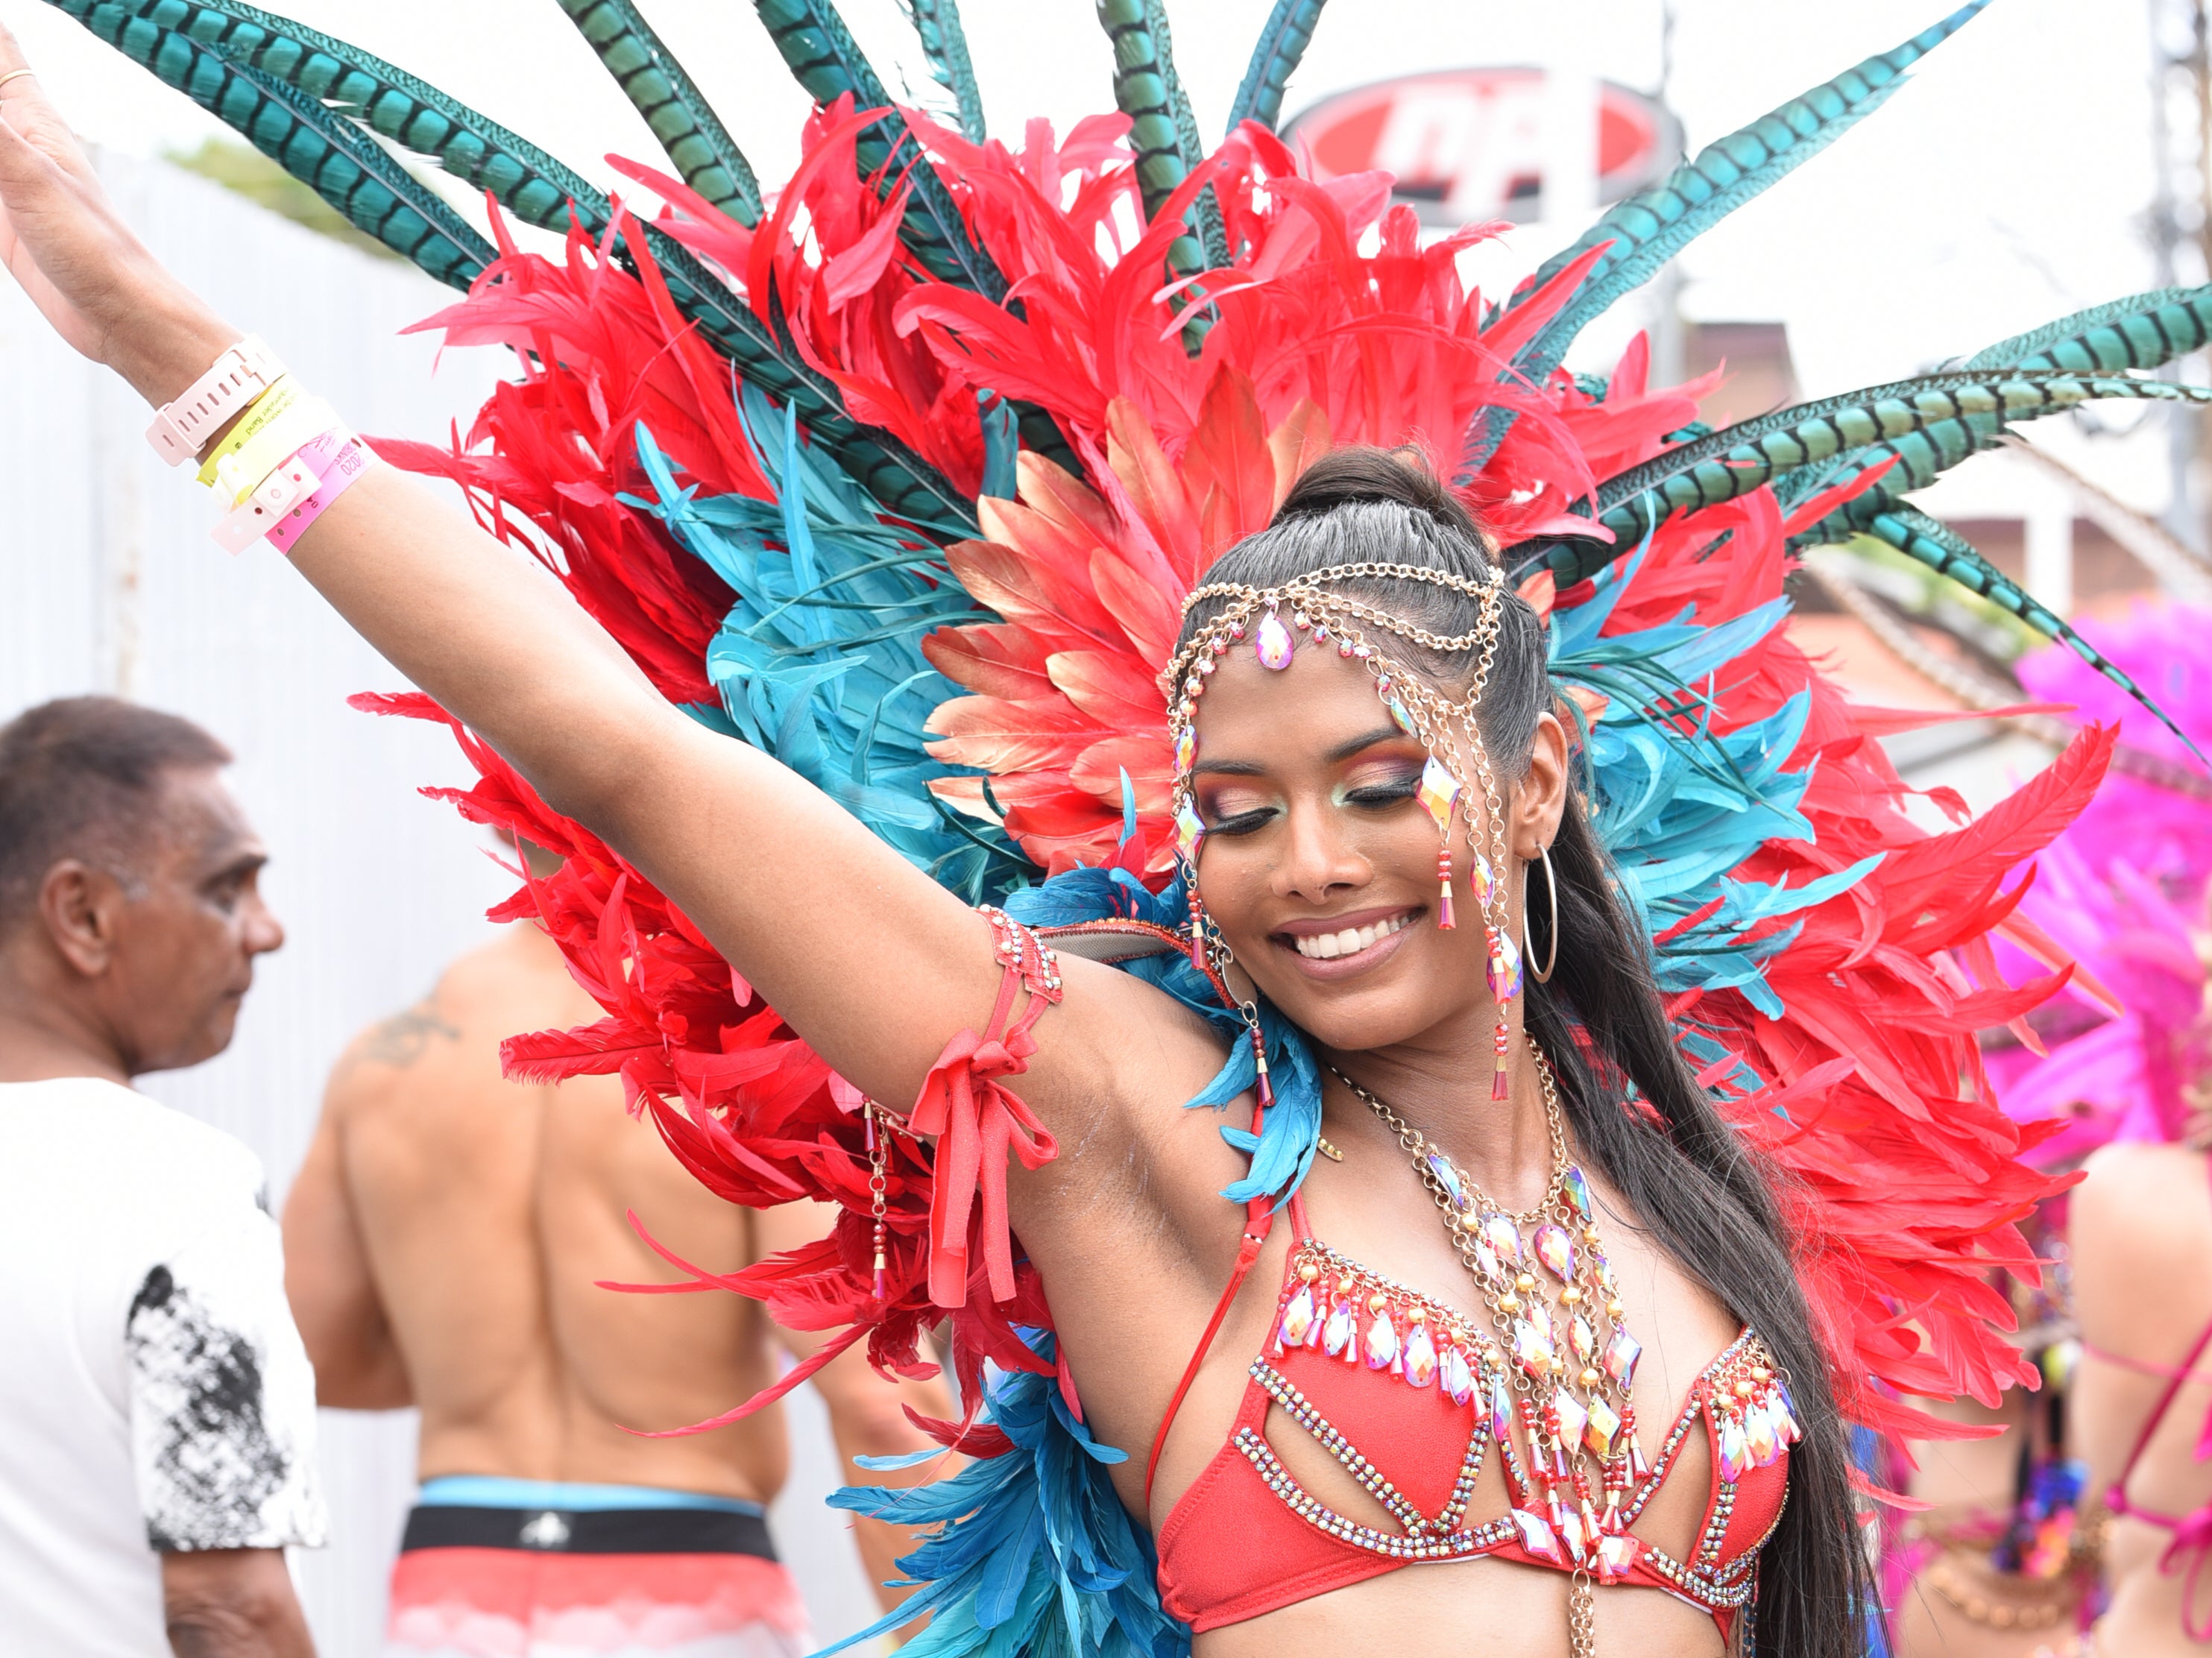 Bird of paradise: Trinidad Carnival is set to be bigger and better next year